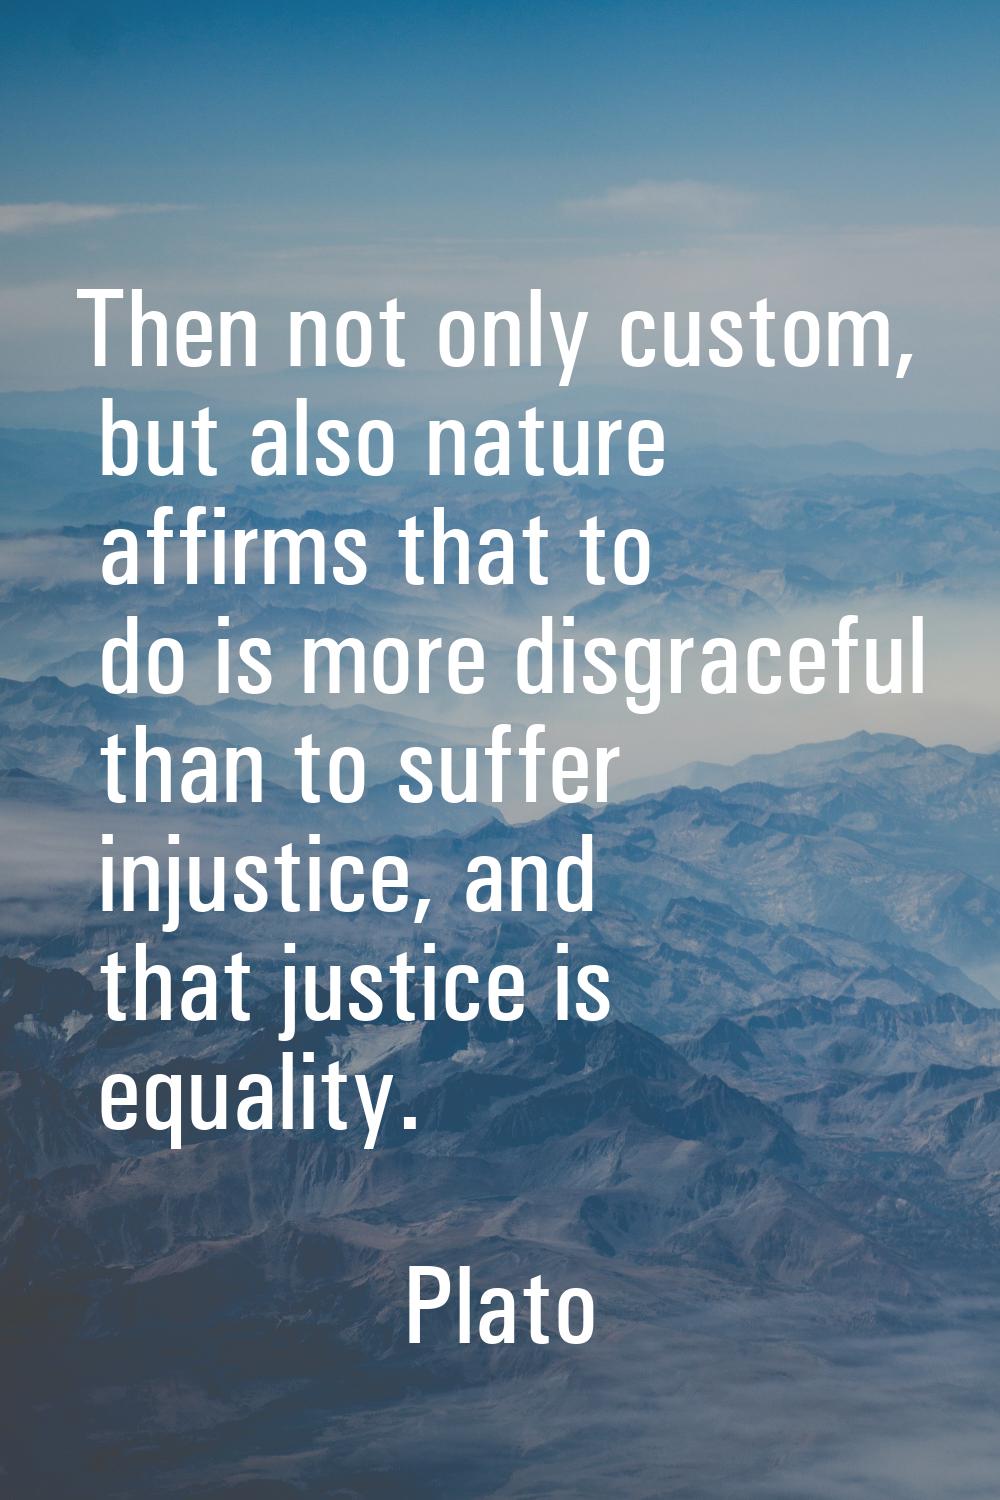 Then not only custom, but also nature affirms that to do is more disgraceful than to suffer injusti